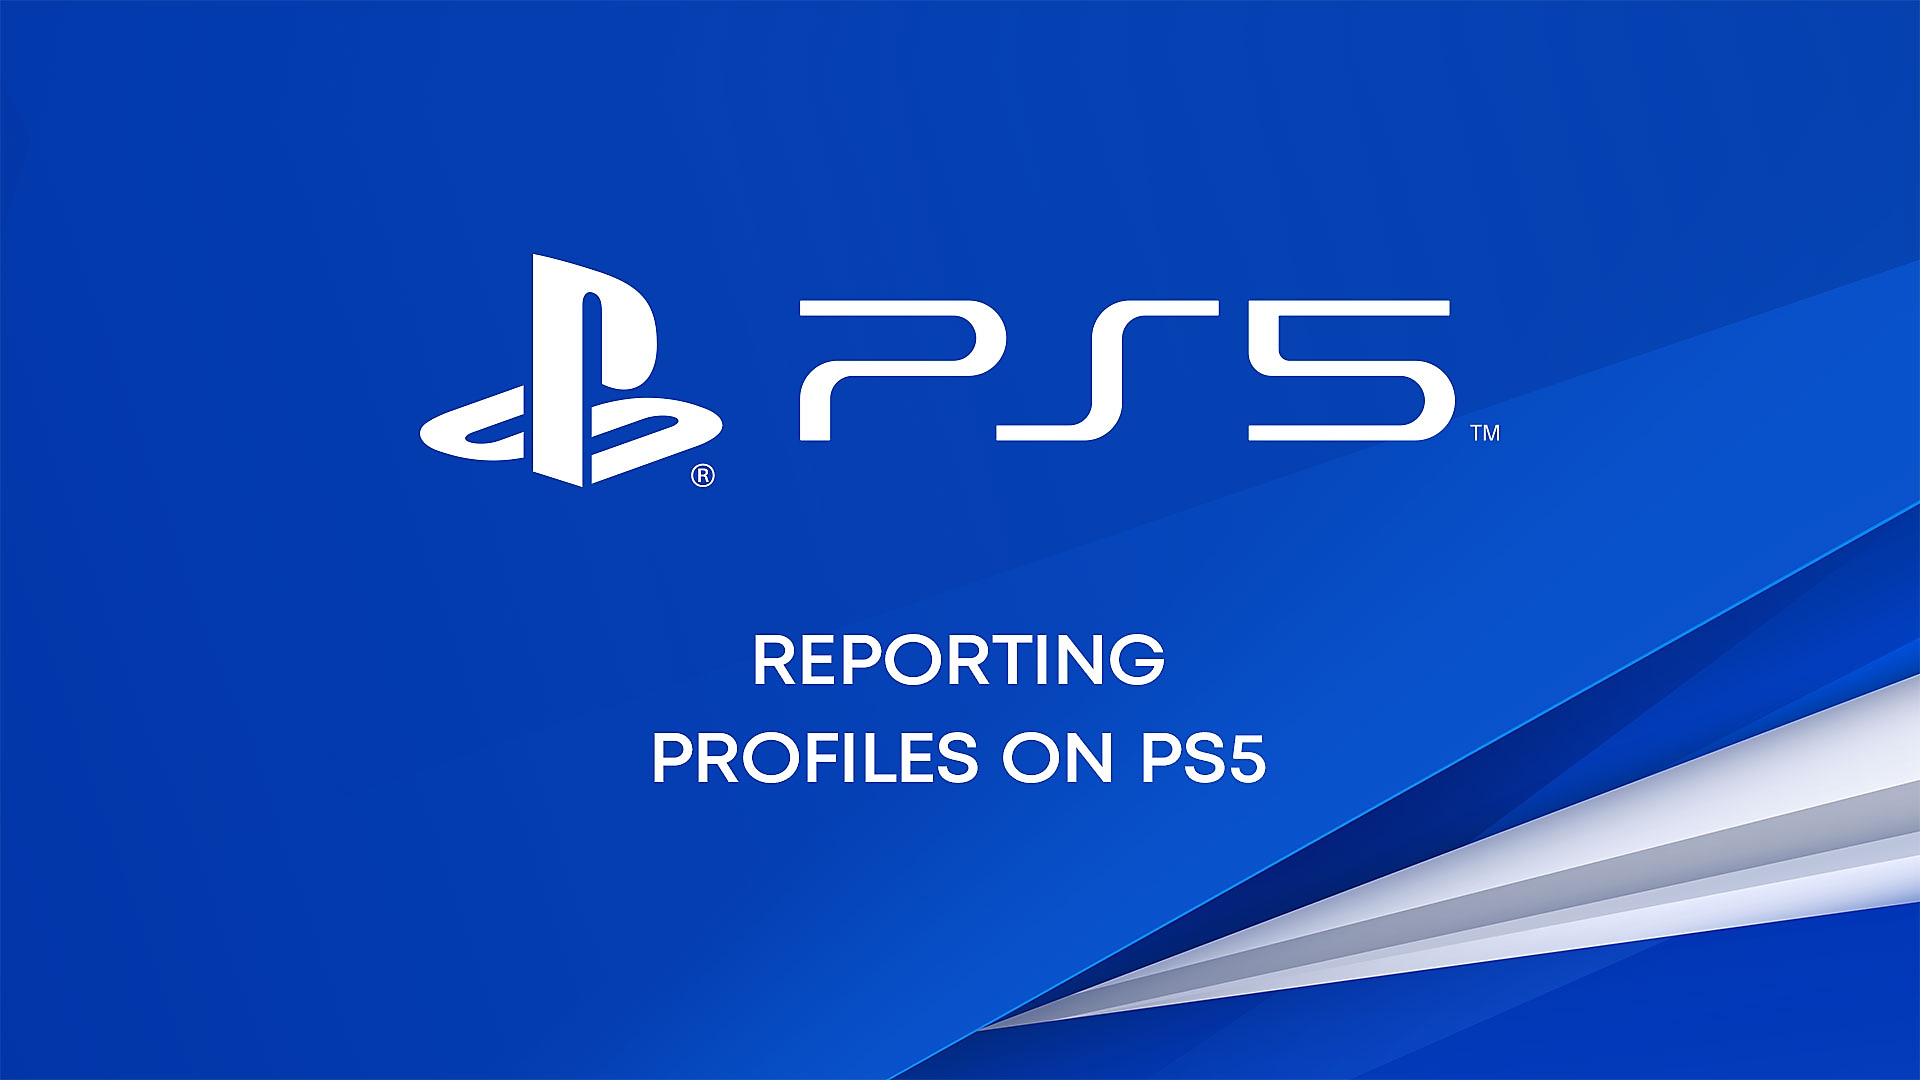 Reporting profiles on PS5 console